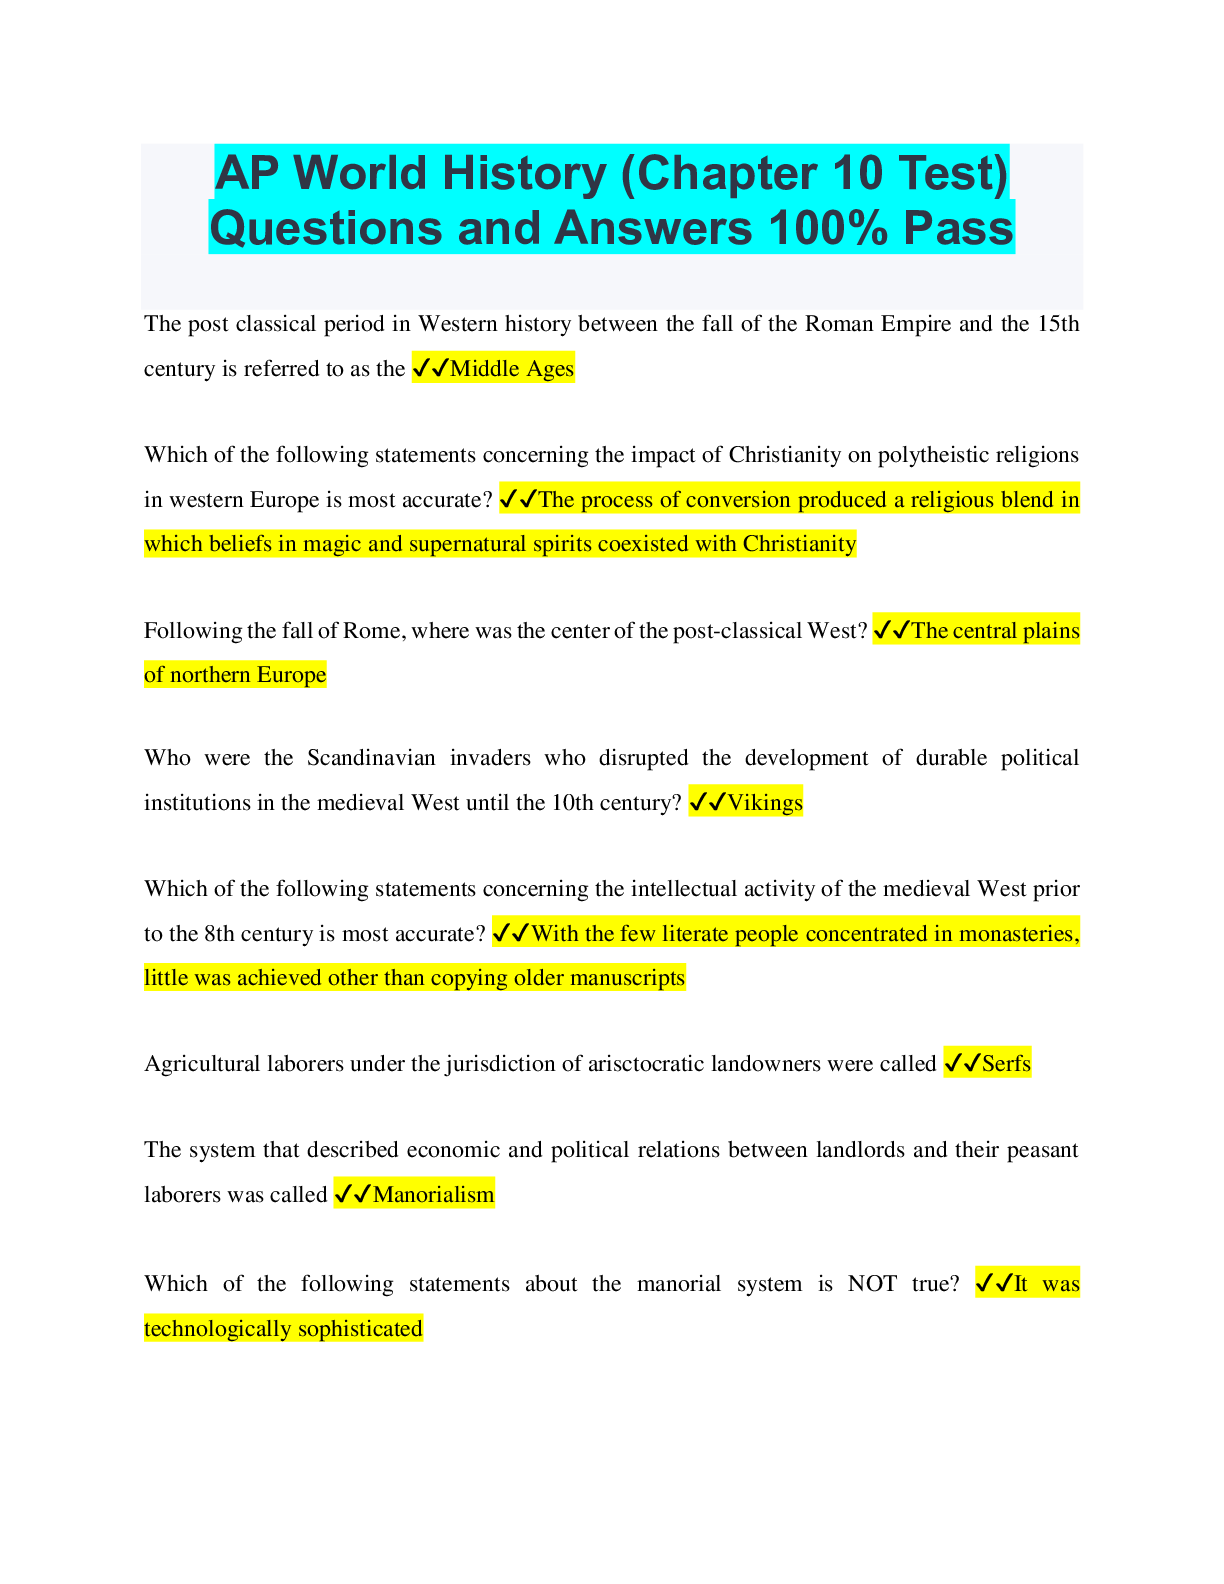 AP World History (Chapter 10 Test) Questions and Answers 100 Pass